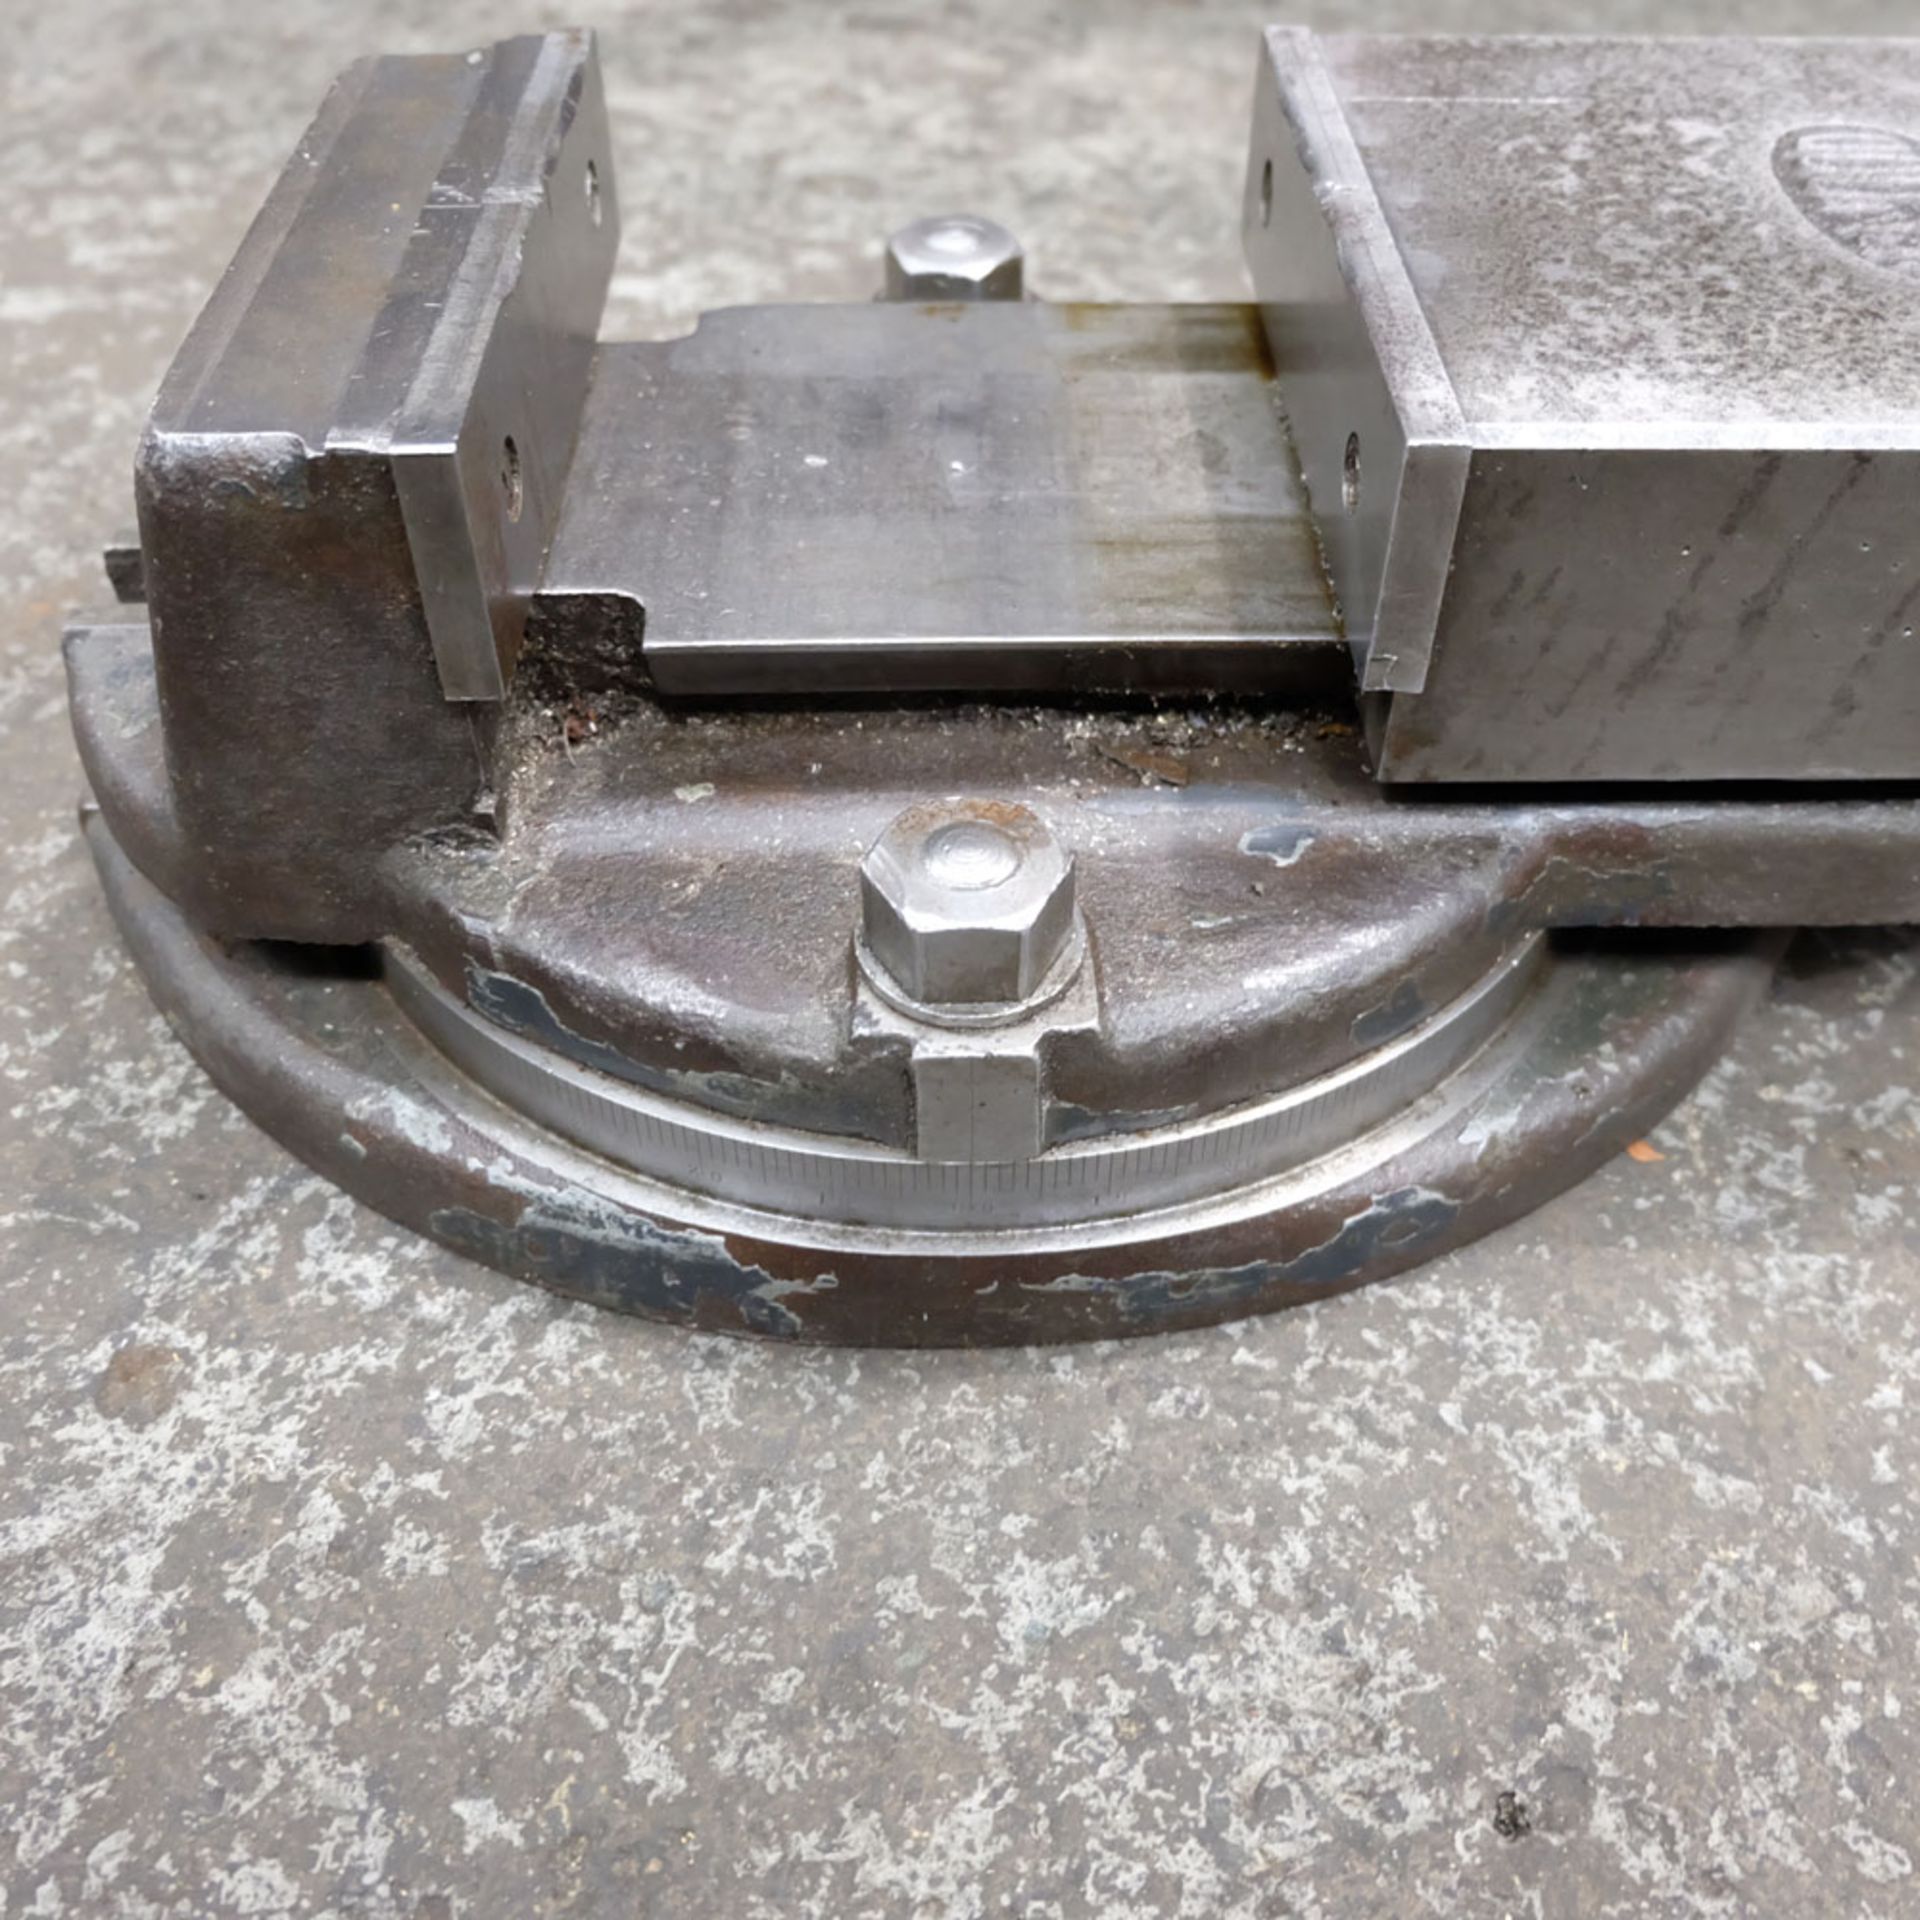 ABWOOD Swivelling Machine Vice. Approx Measurements - Jaws 6 1/4". Max Opening 5". - Image 4 of 5